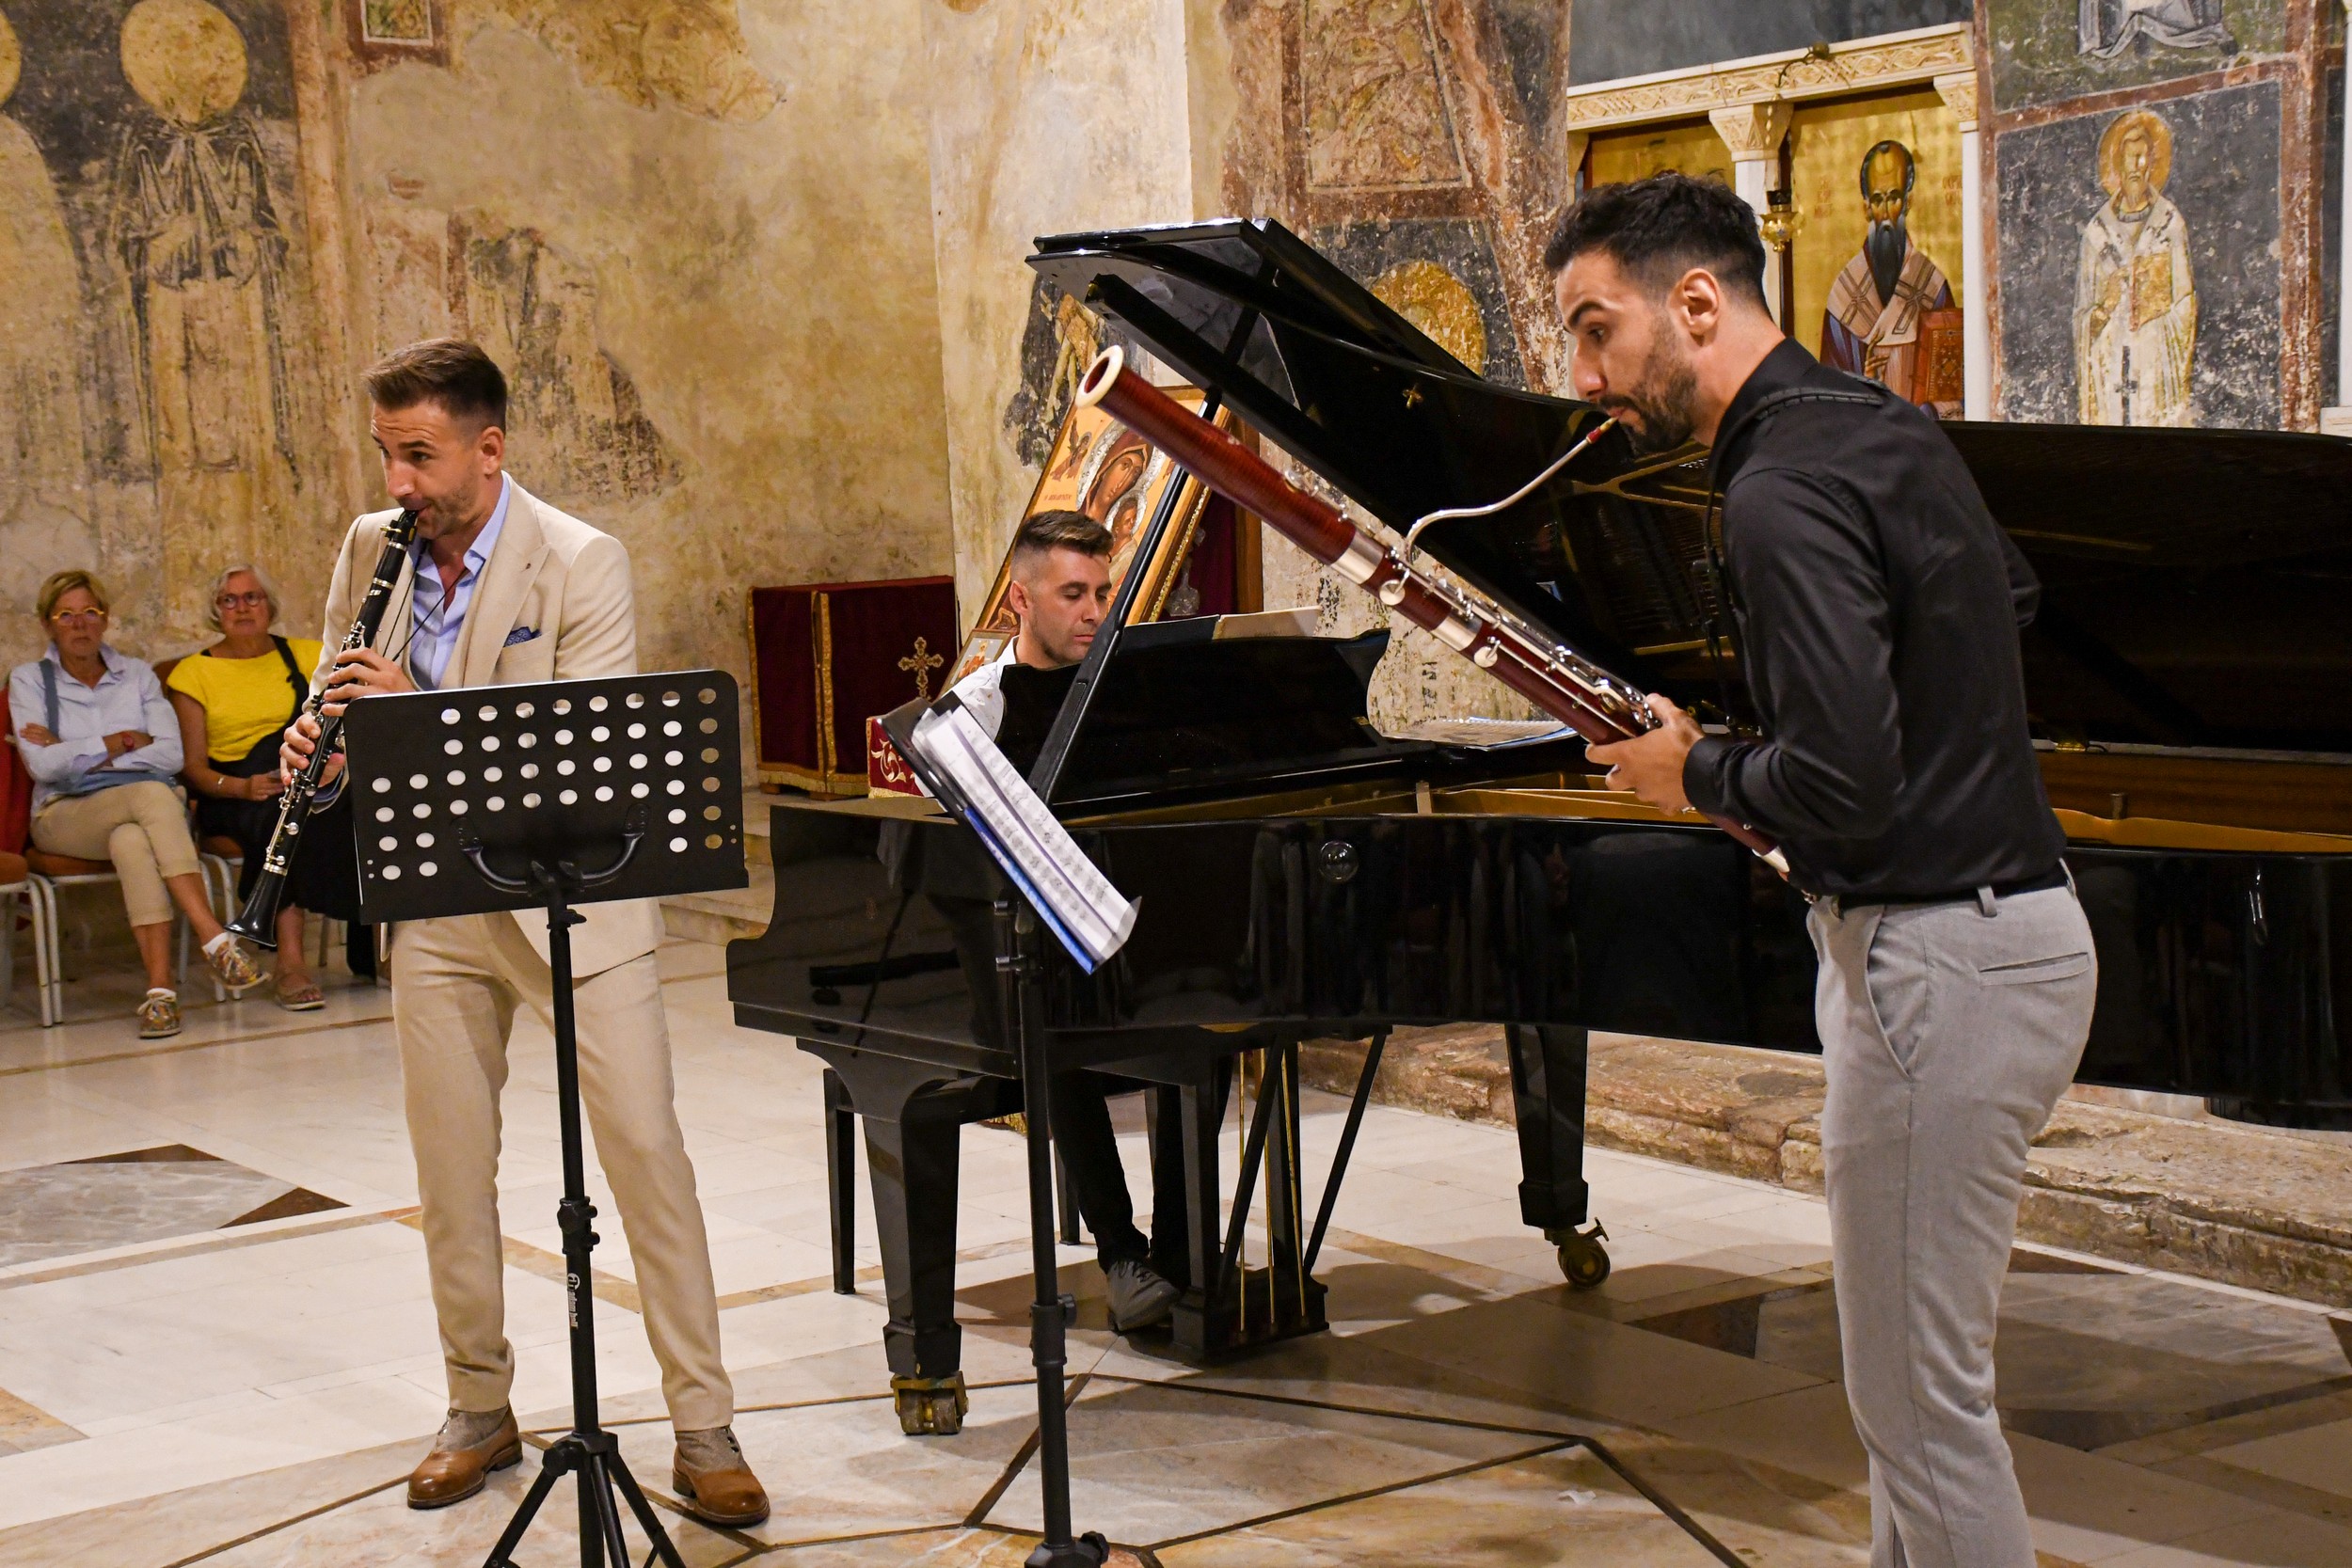 Audience travelled through music eras with the Minchic brothers and the pianist Cvetkovic